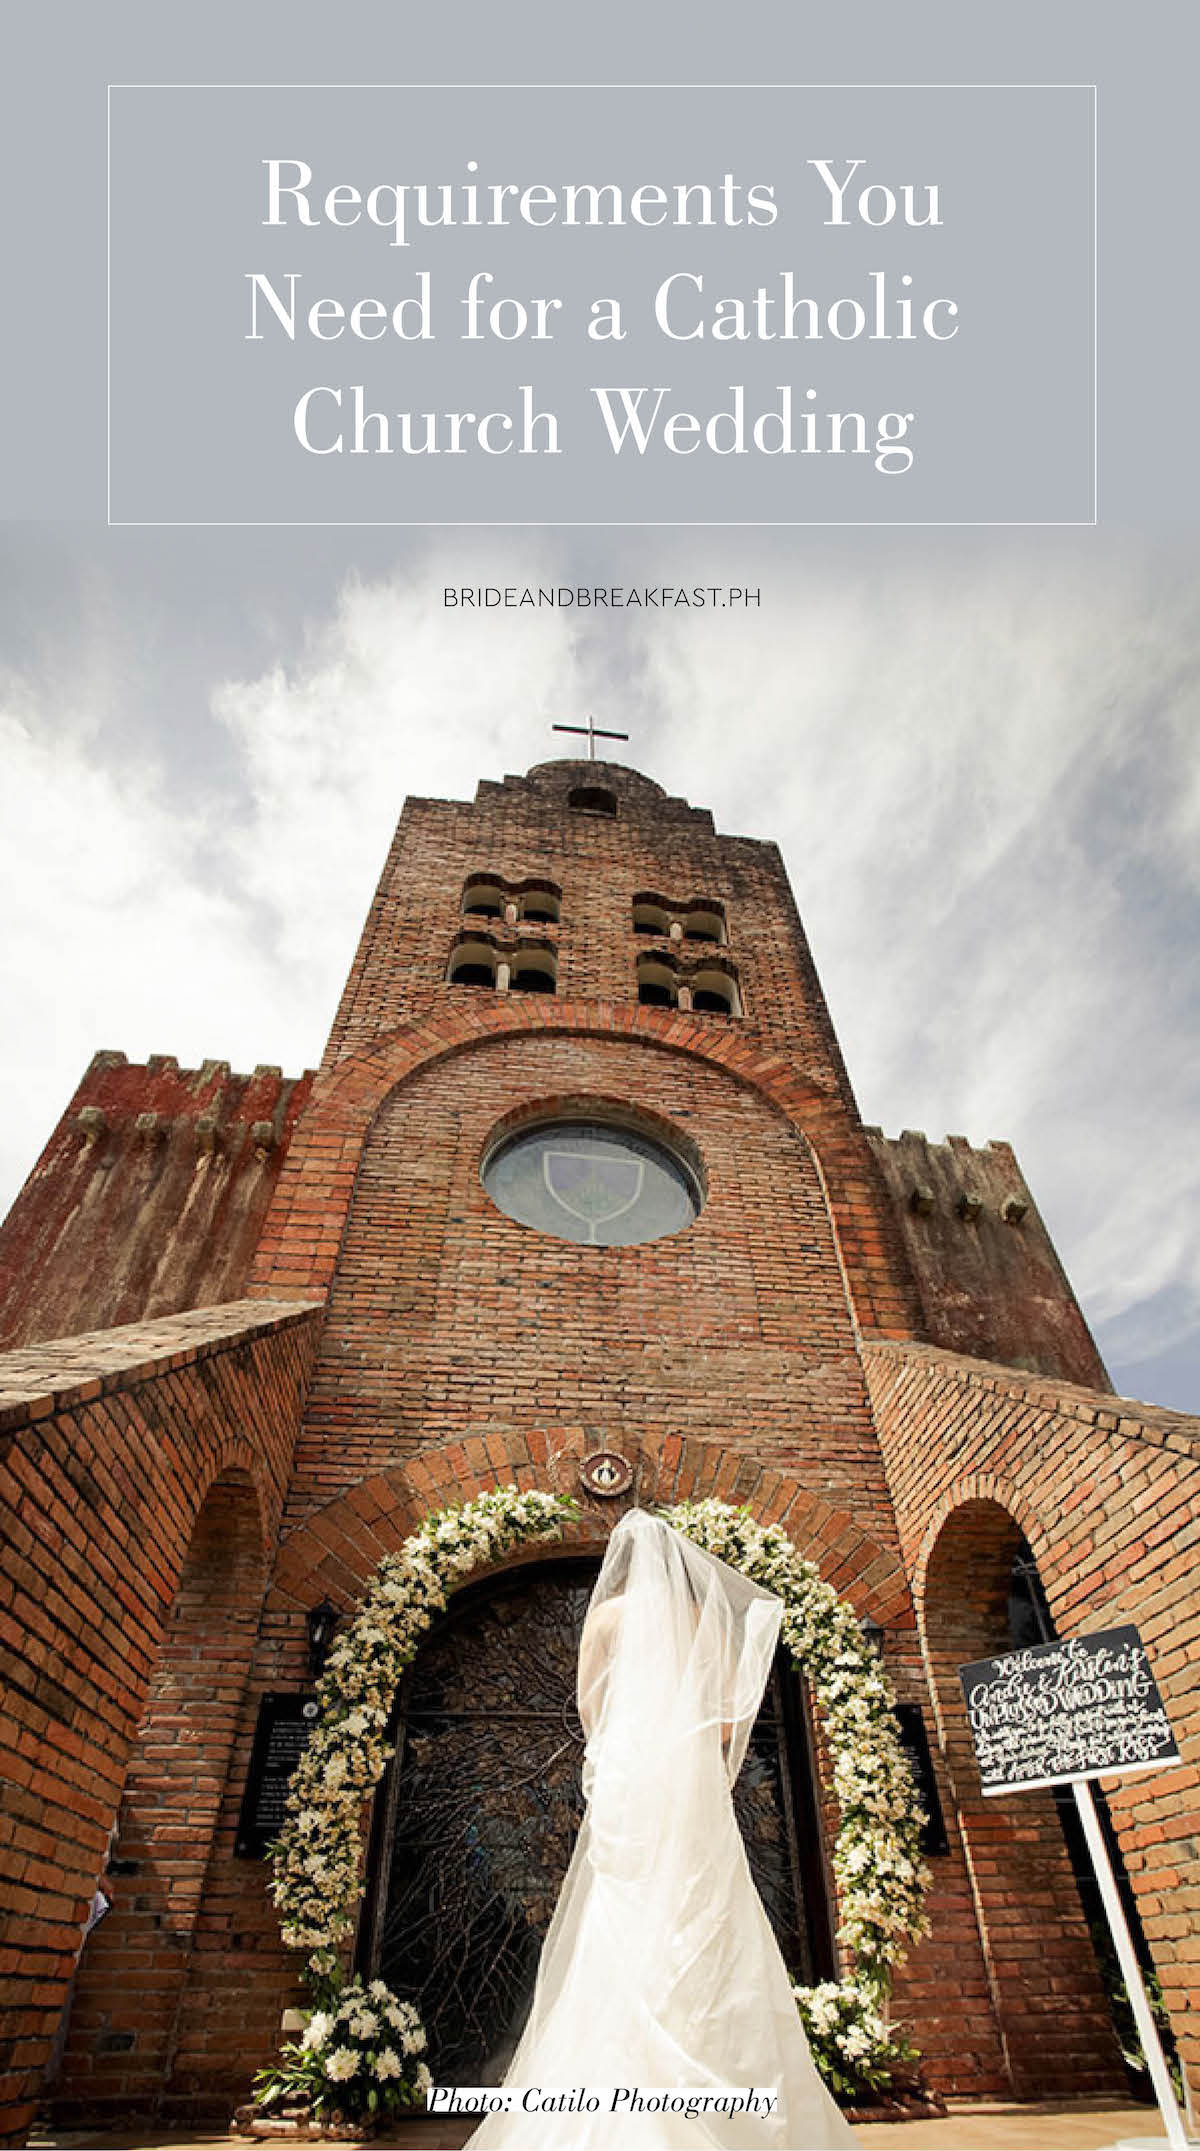 Requirements You Need for a Catholic Church Wedding Photo: Catilo Photography